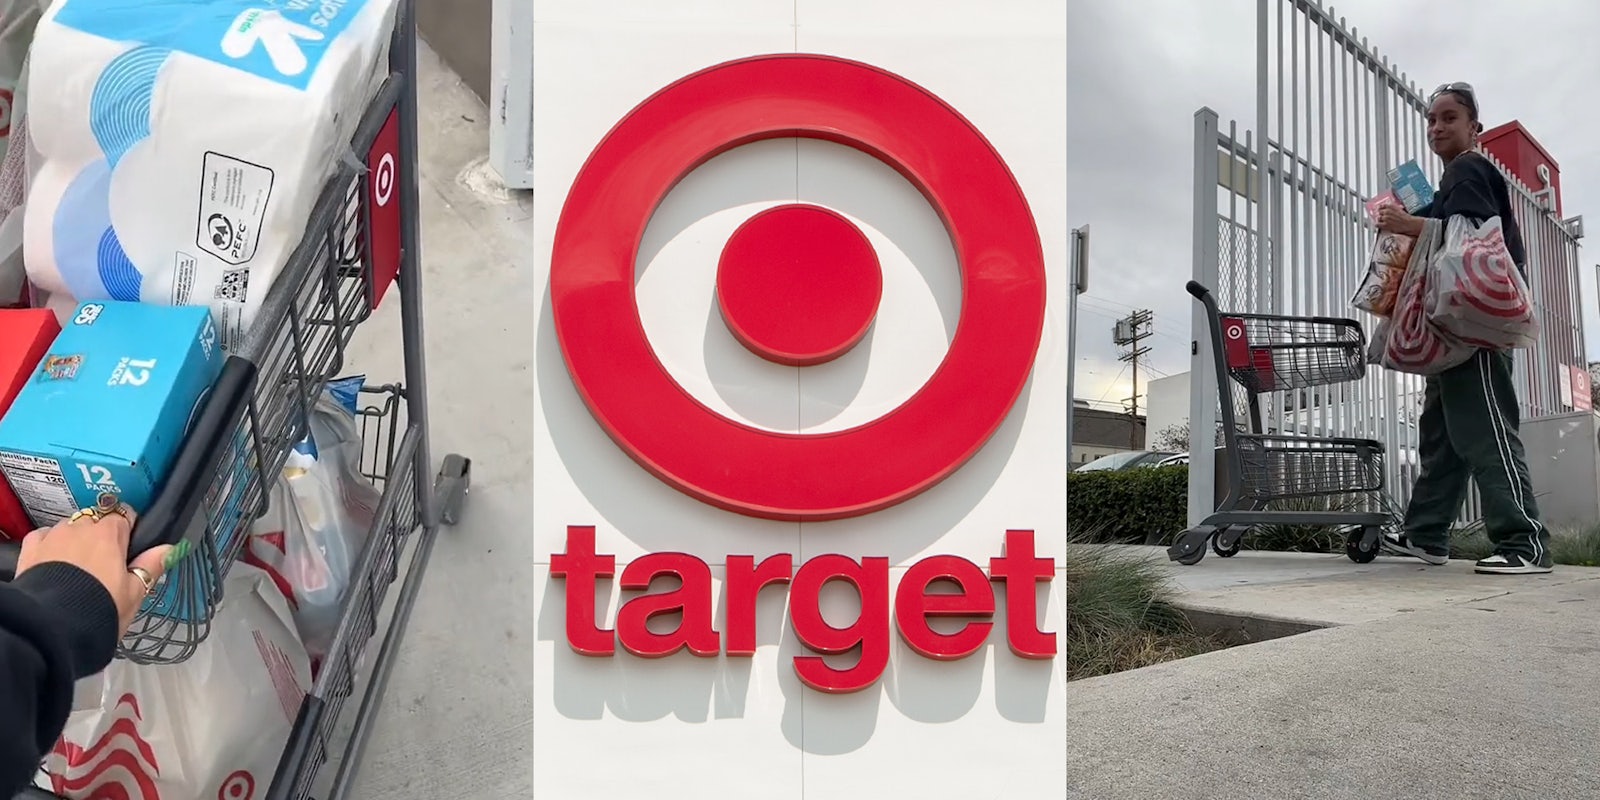 person trying to pull Target shopping cart with groceries inside (l) Target sign on wall (c) person unloading groceries from cart (r)